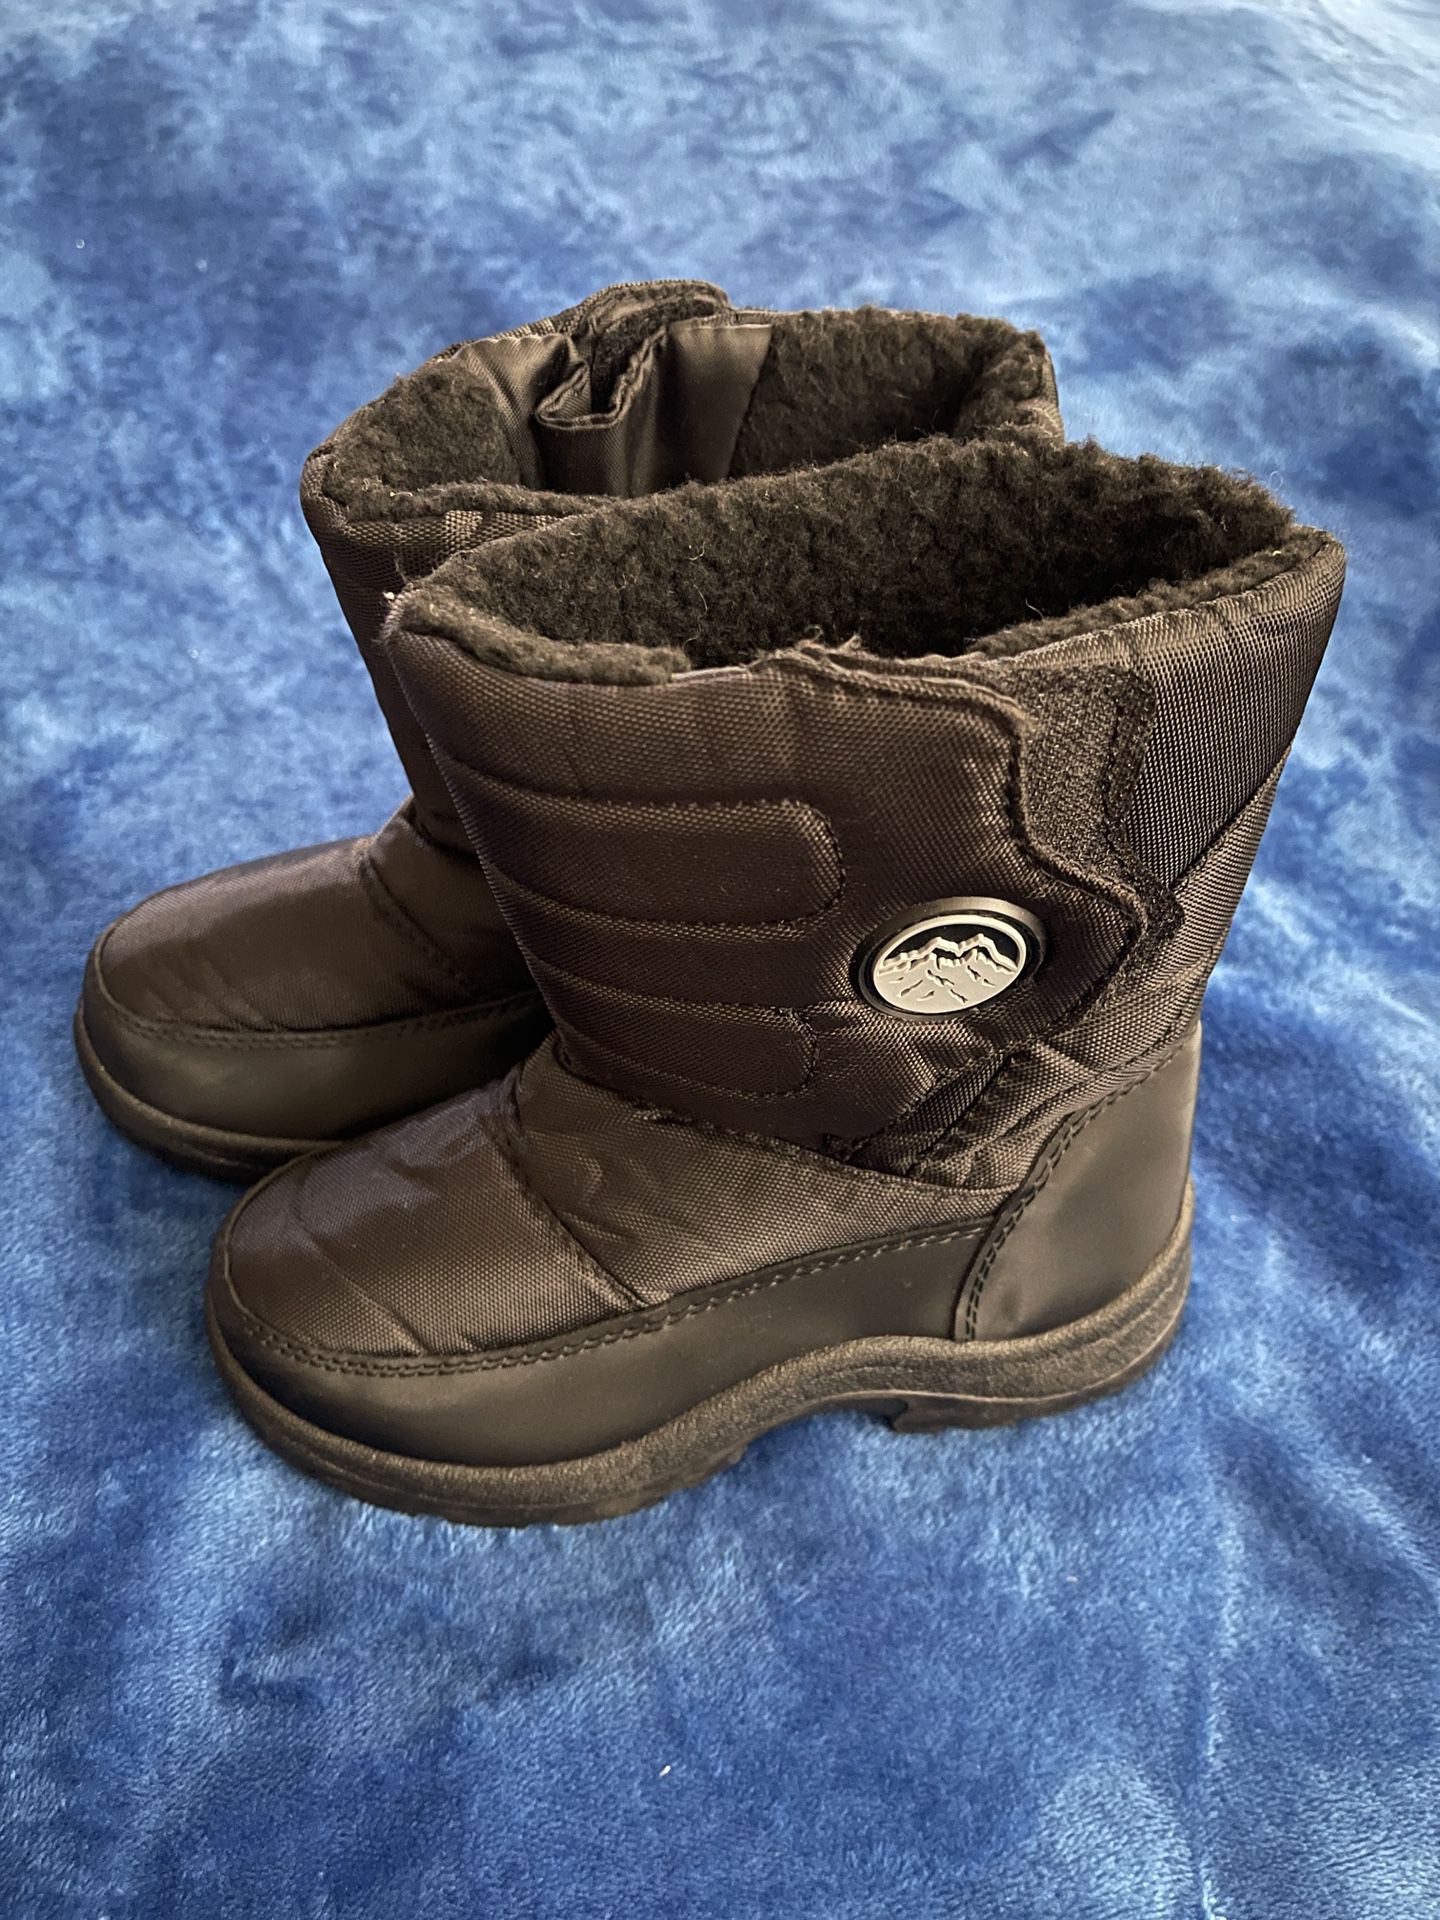 New Winter Snow Boots Size 1